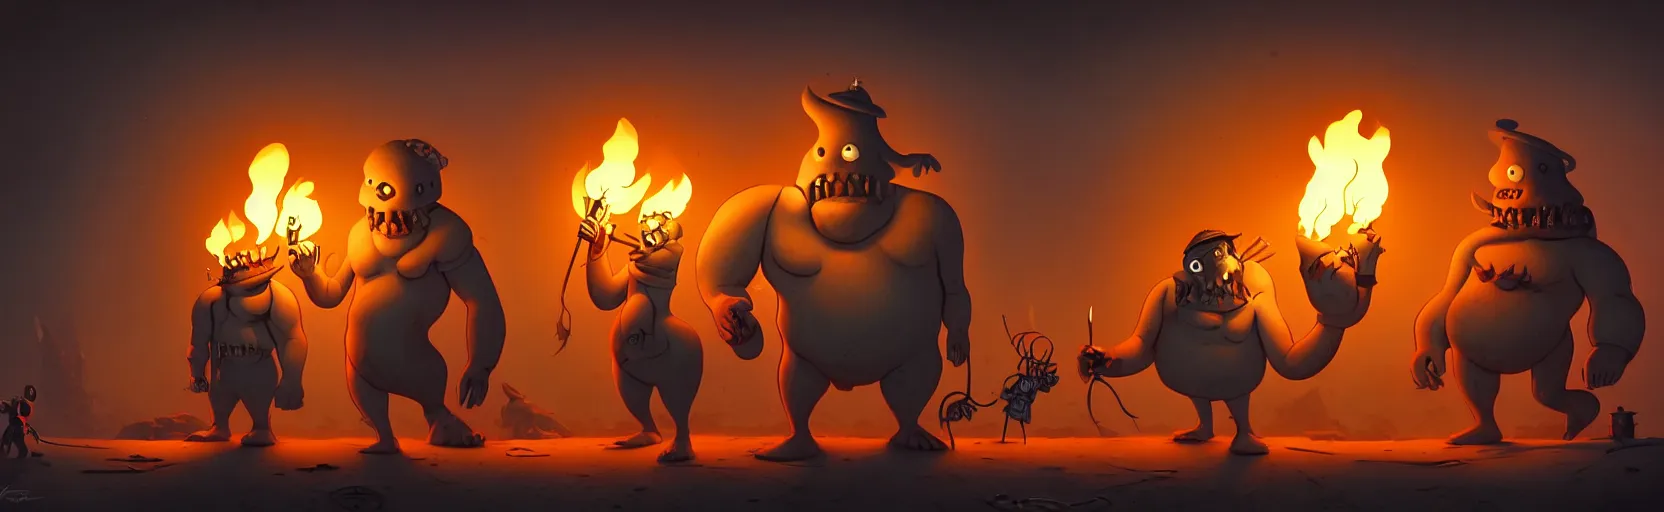 Image similar to uncanny whimsical savage mutants from the depths of a vast wasteland in the collective unconscious, dramatic lighting from fiery torches, surreal fleischer cartoon characters, shallow dof, surreal painting by ronny khalil